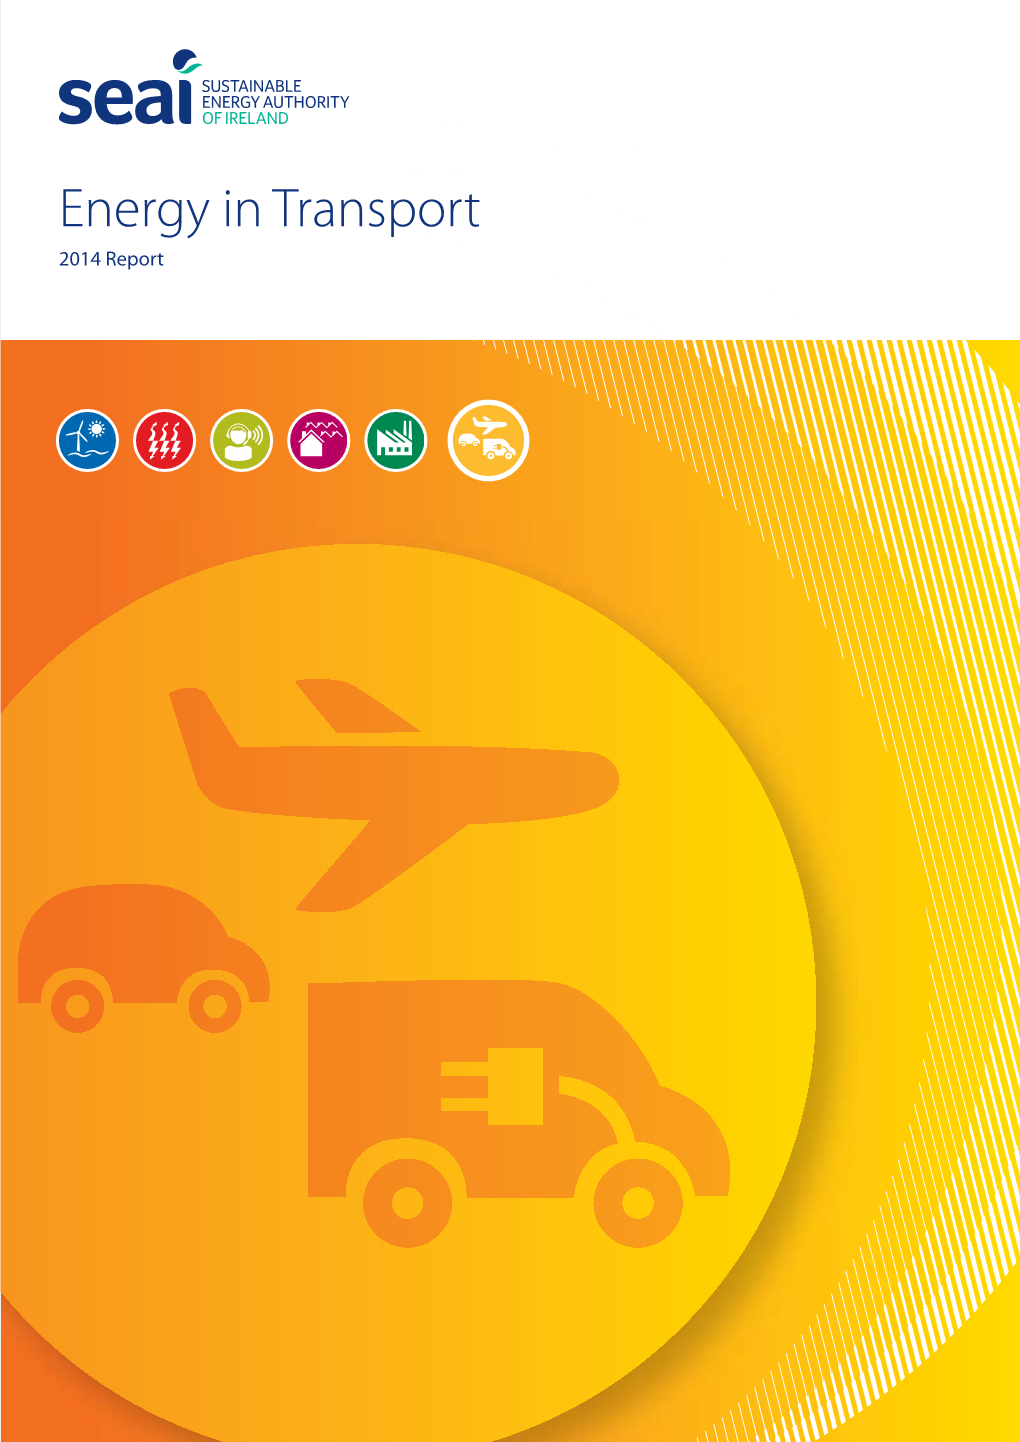 Energy in Transport Report in 2009 There Has Been a Significant Change in the Trends in Energy Consumption in the Transport Sector